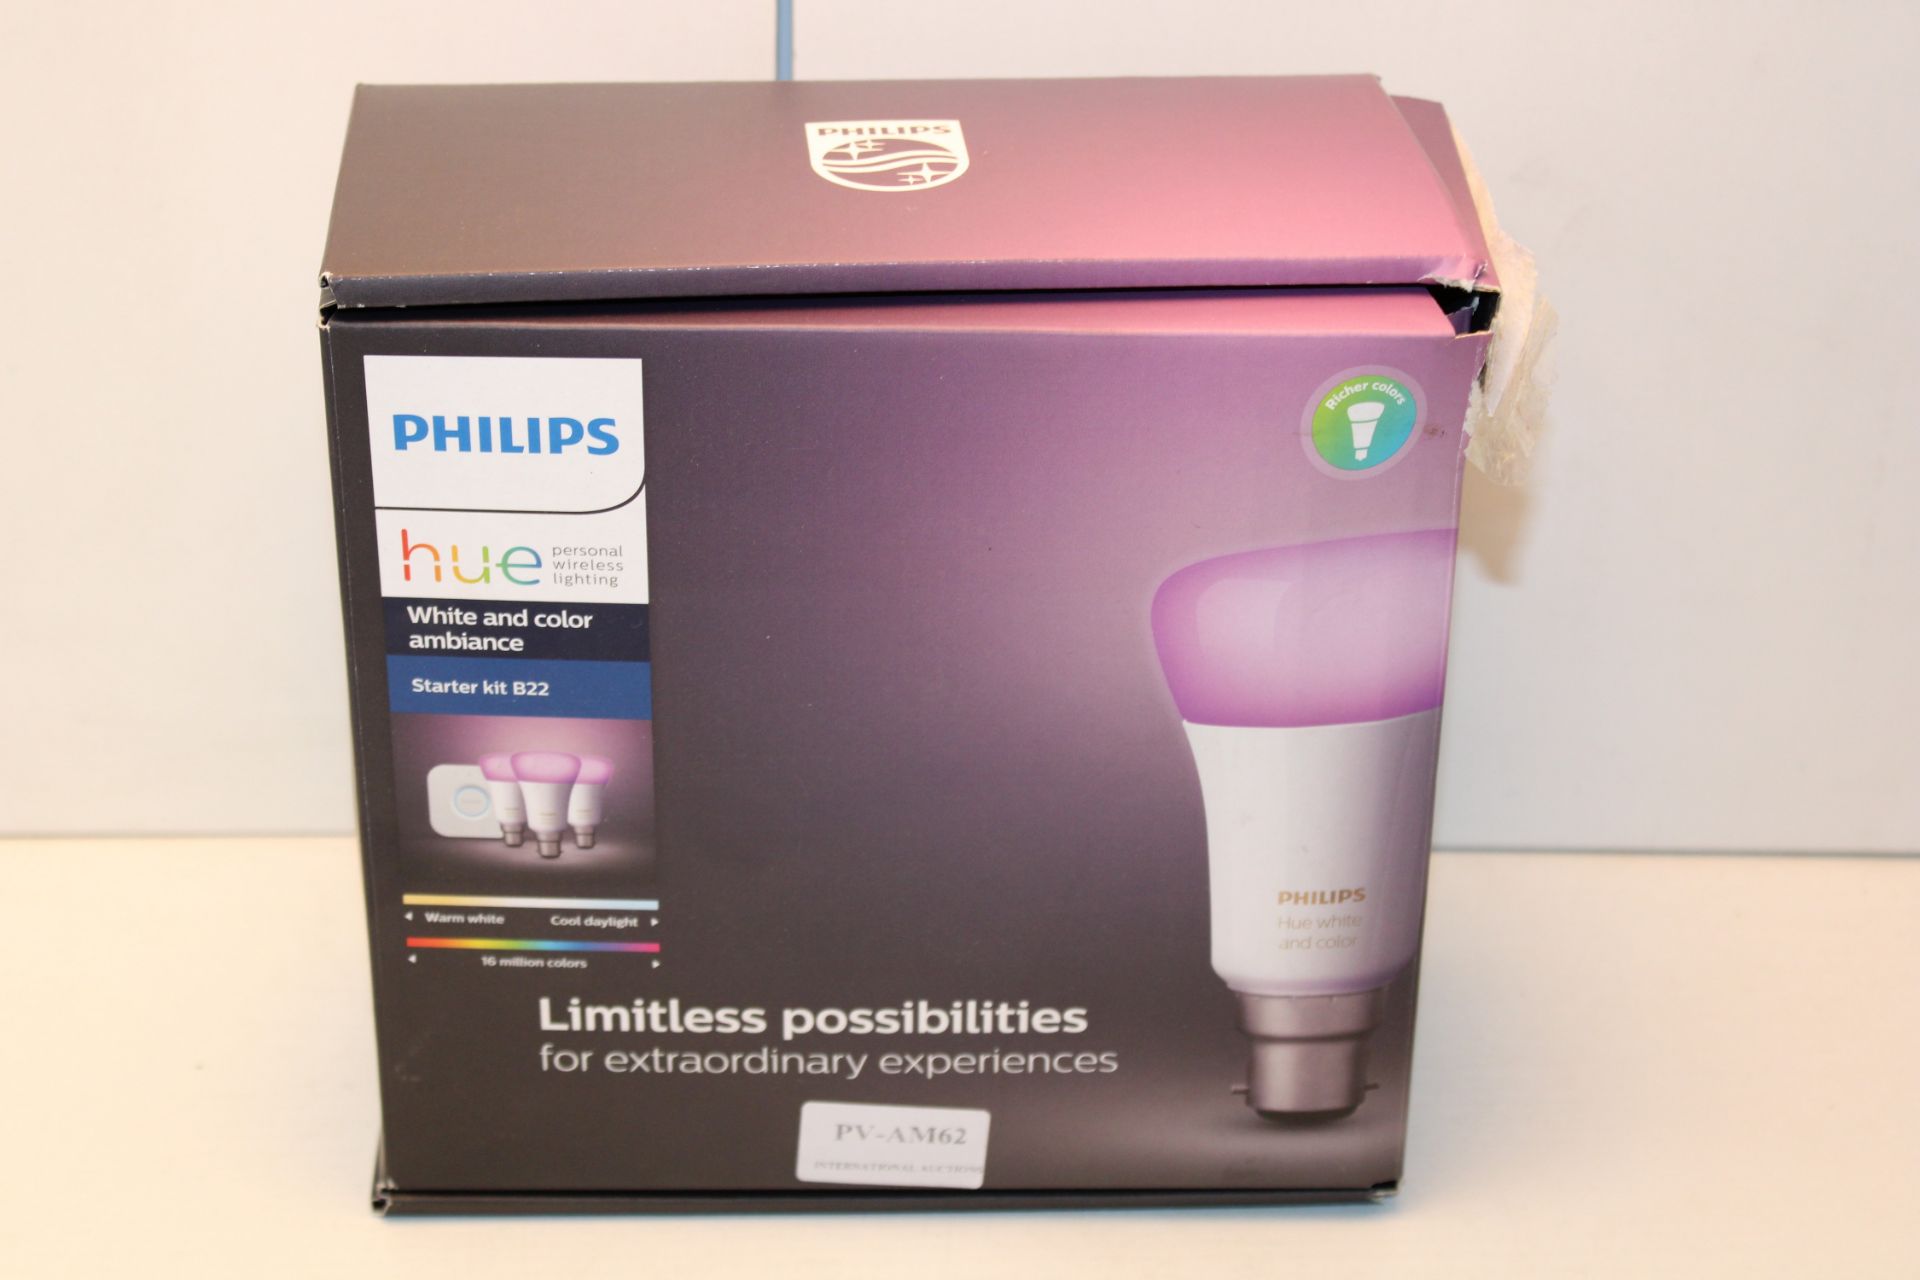 BOXED PHILIPS HUE PERSONAL WIRELESS LIGHTING WHITE AND COLOUR AMBIANCE STARTER KIT B22 RRP £129.